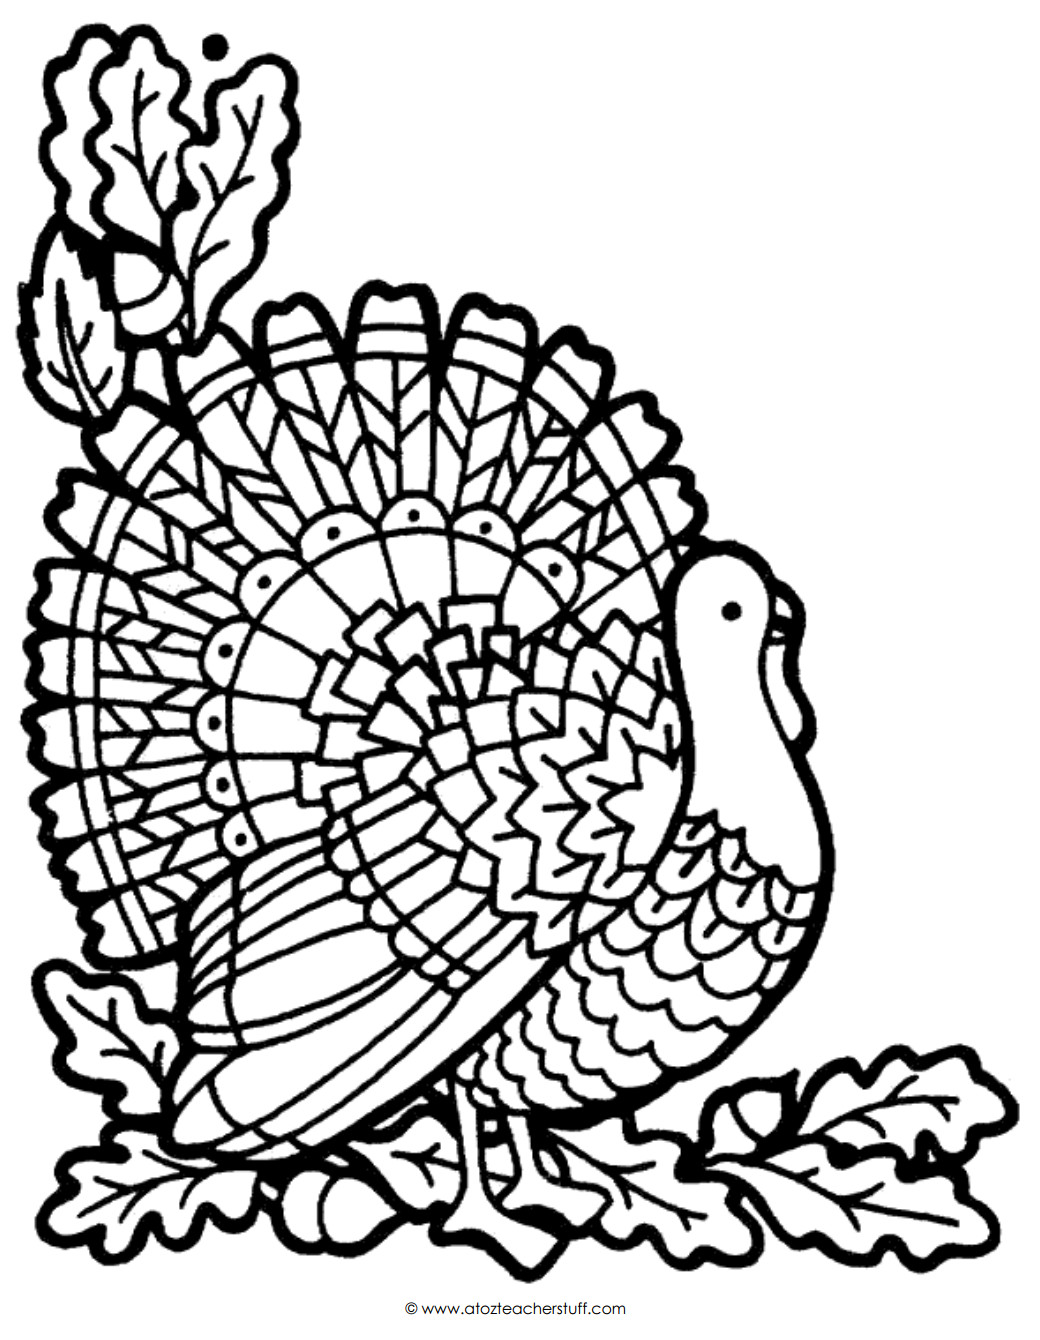 Turkey Printable Coloring Pages
 Turkey Coloring Page